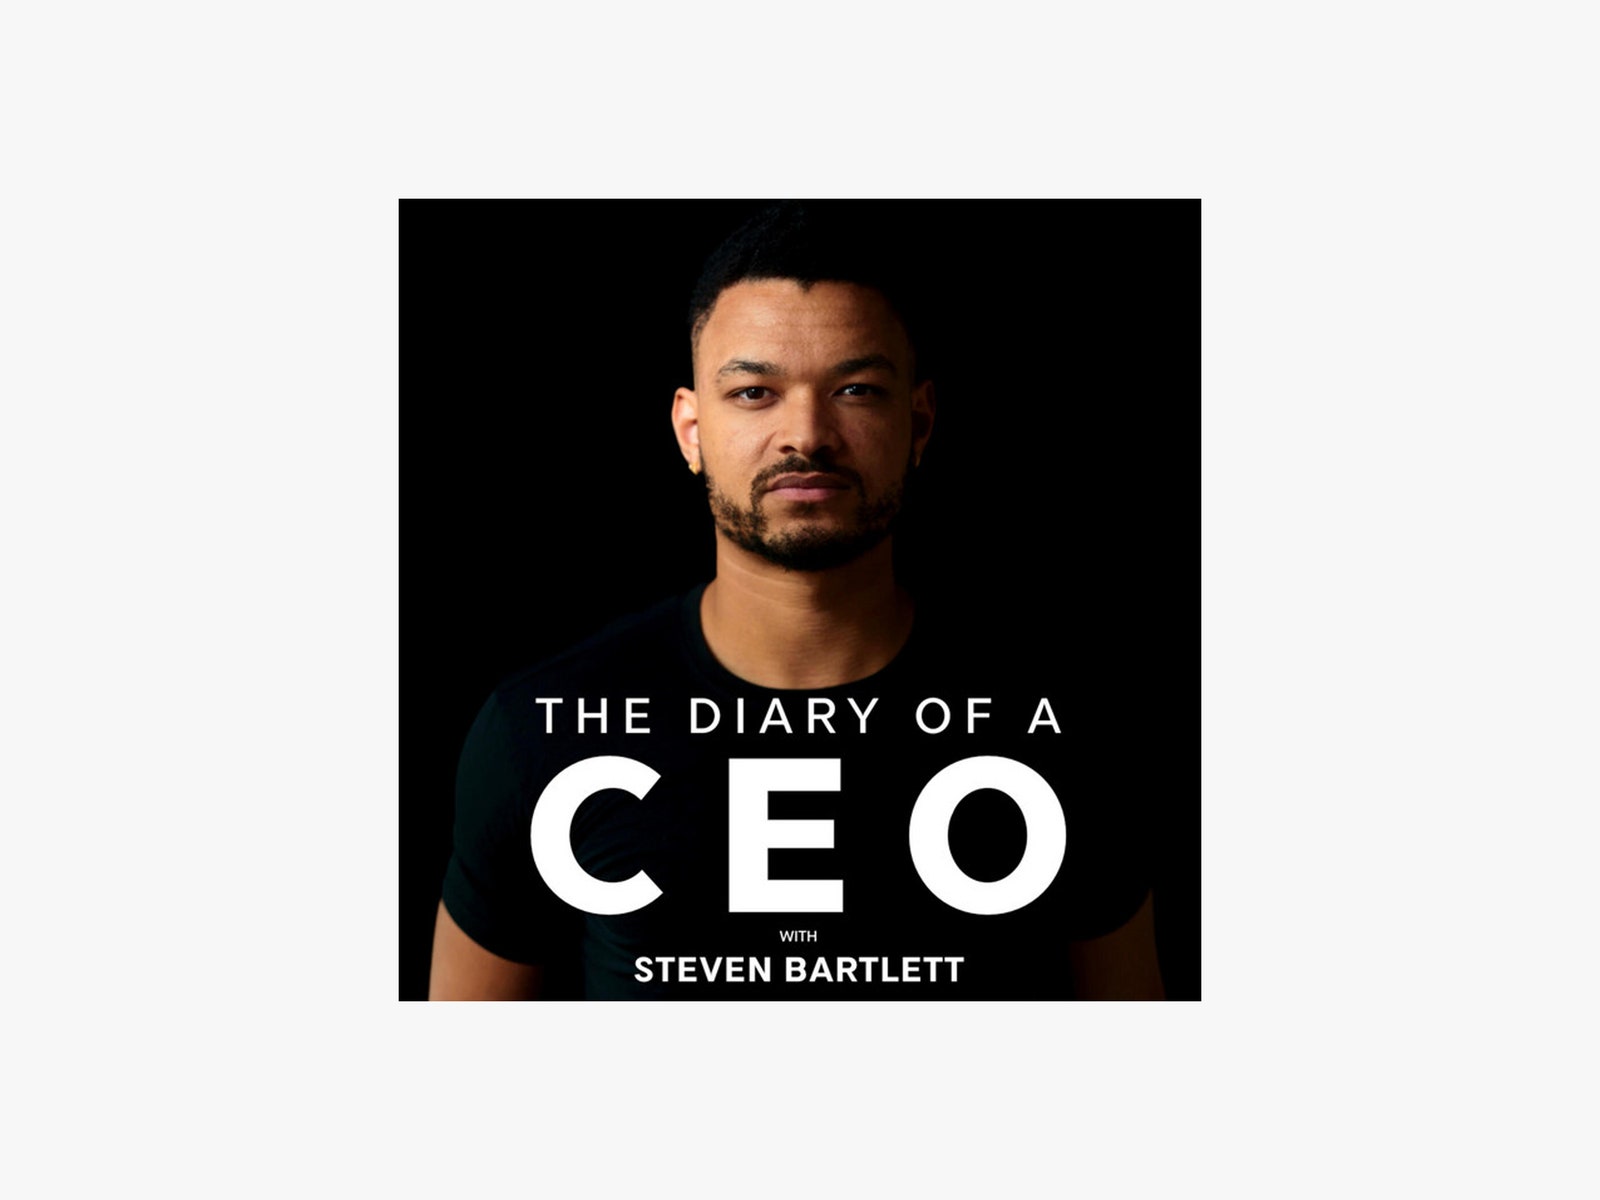 The Diary of A CEO podcast art featuring host Steven Bartlett